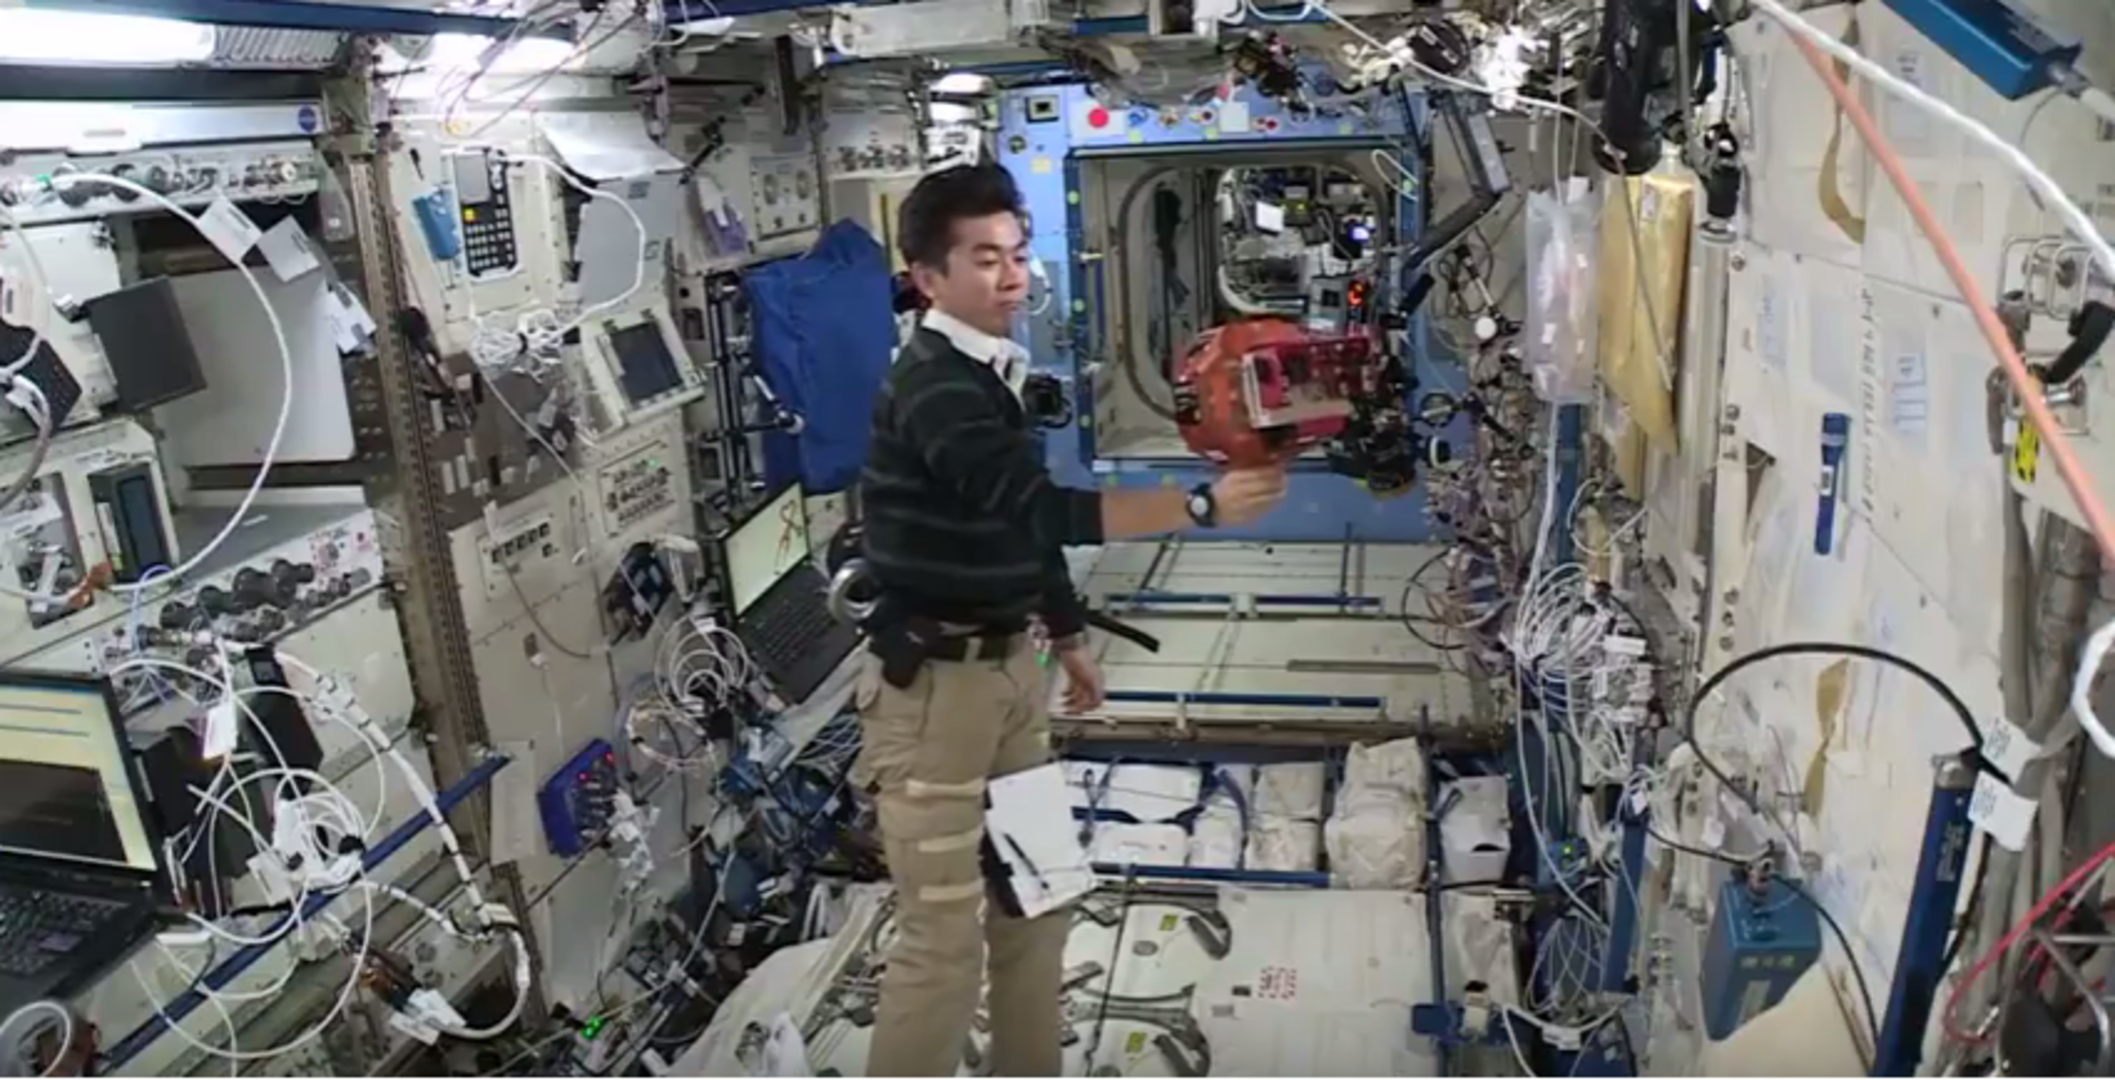 Spheres drone with ISS crewman